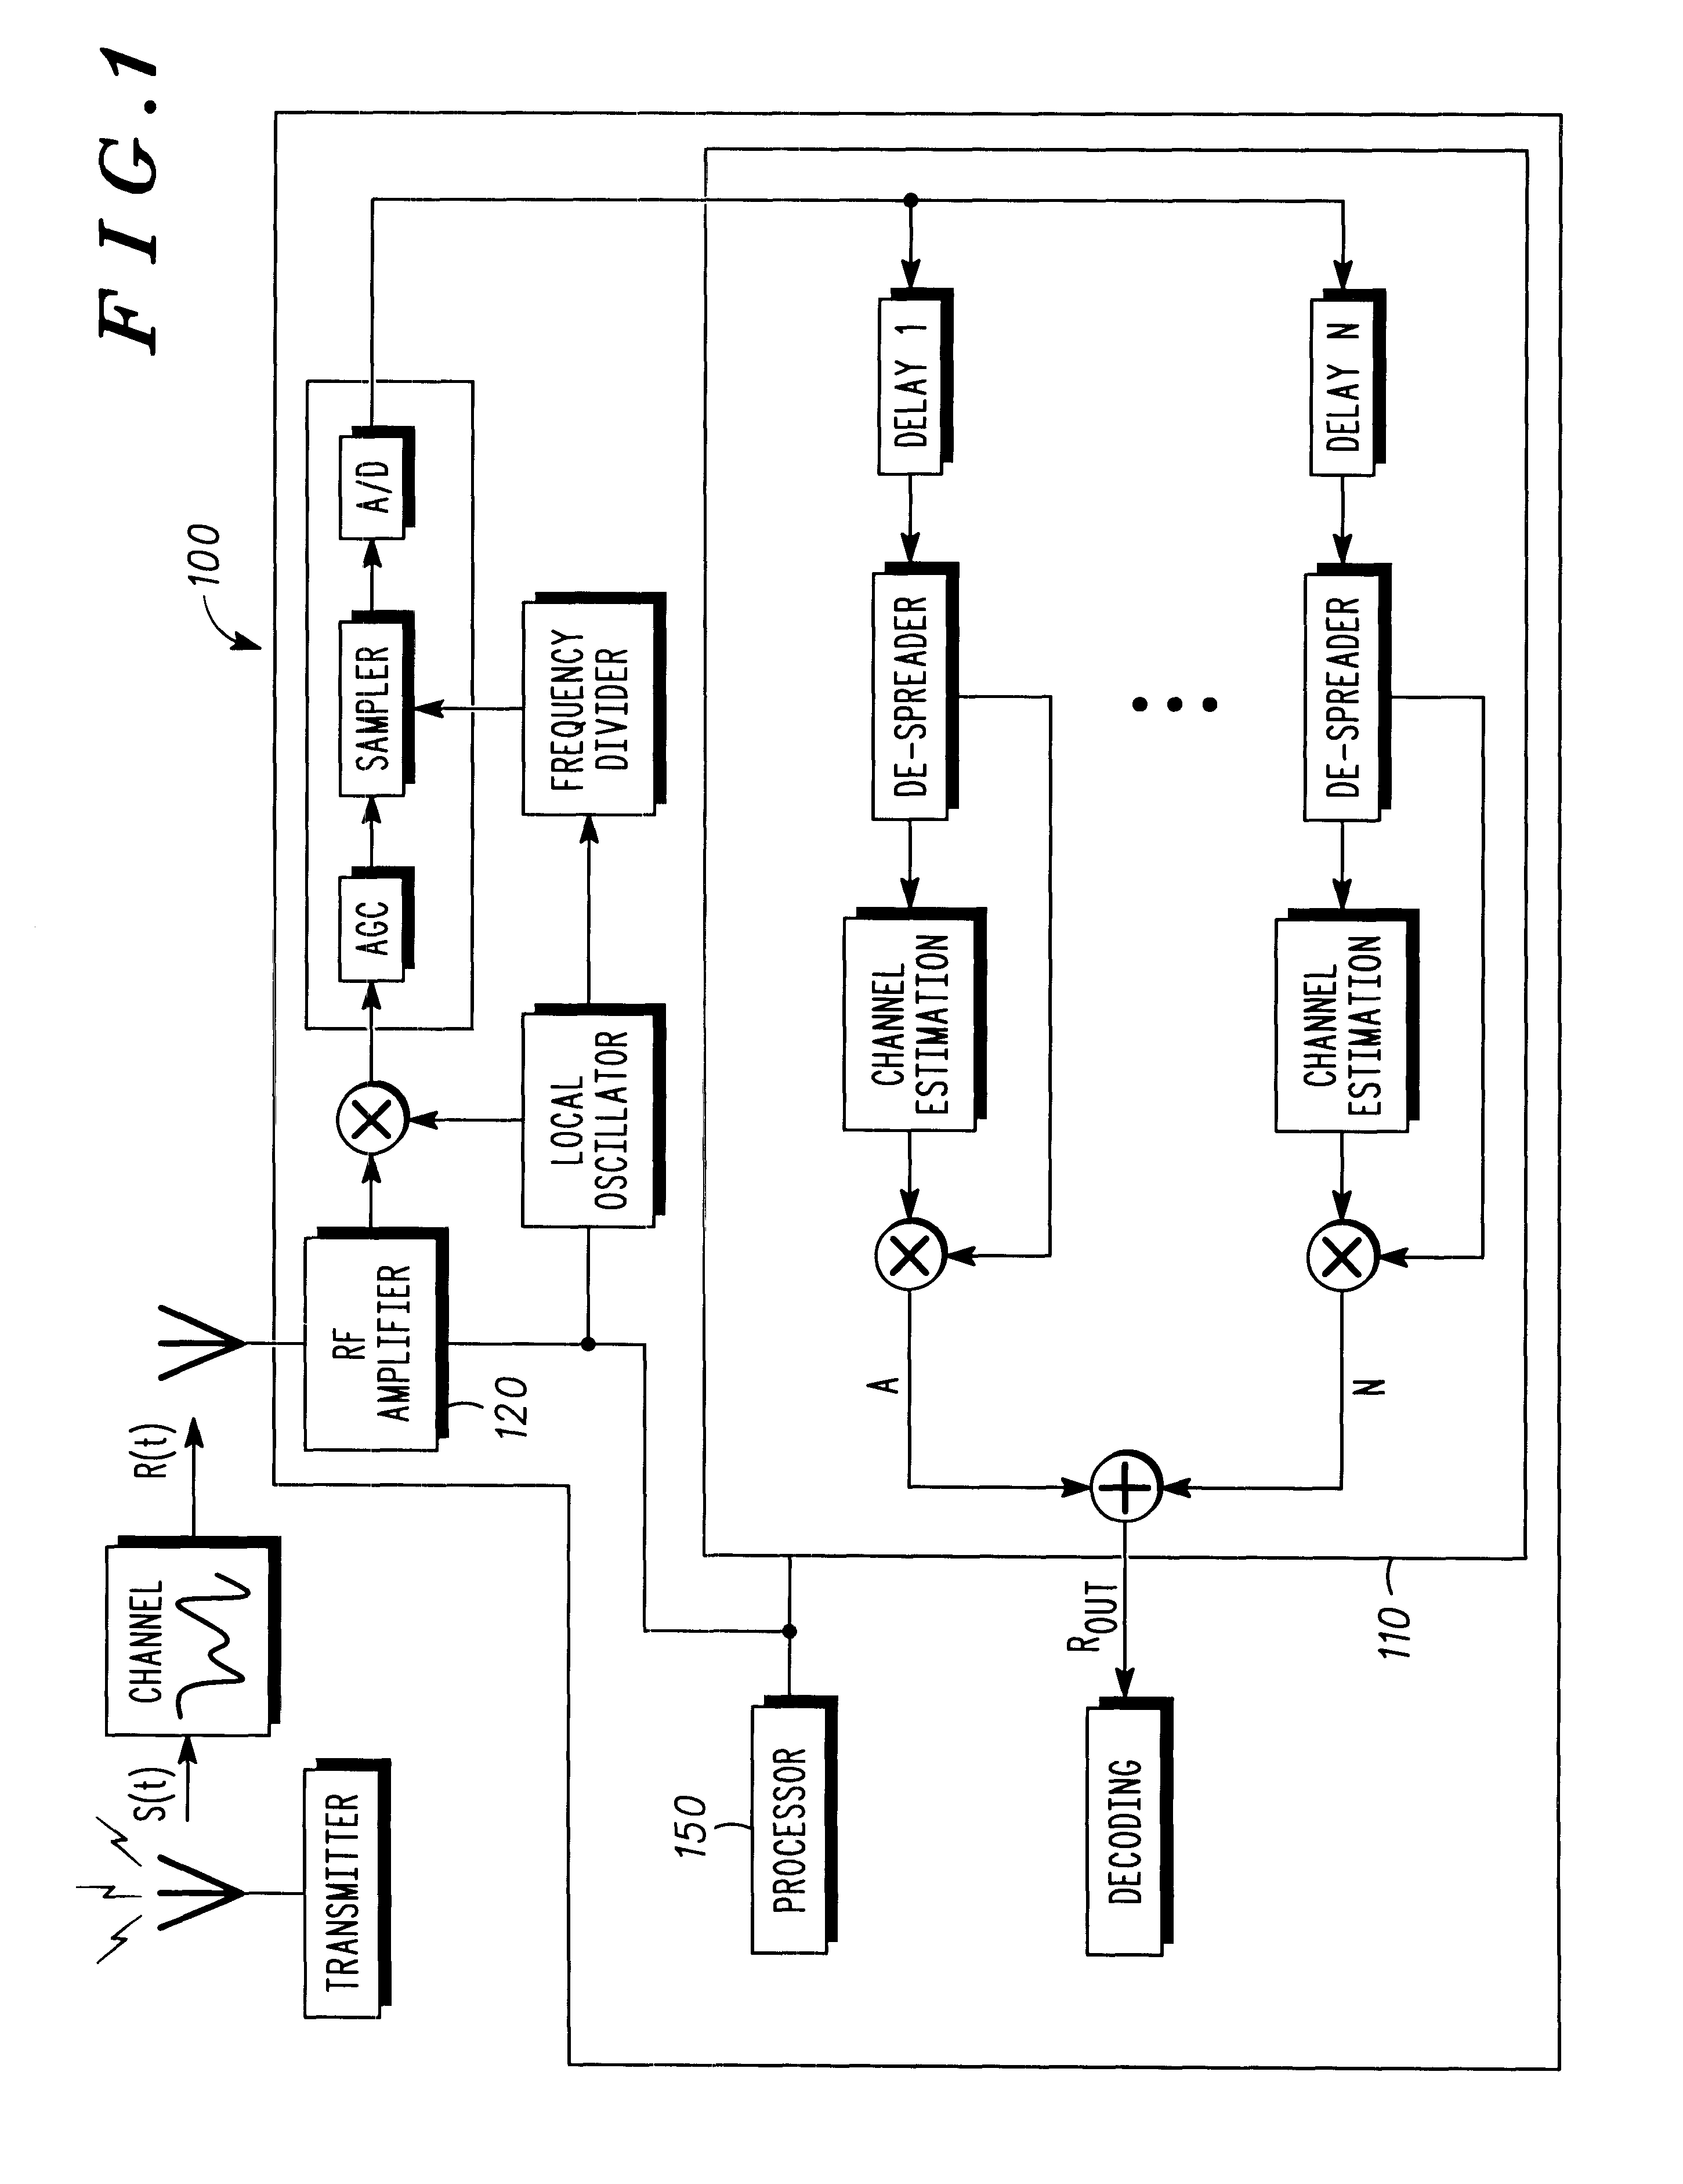 Doppler spread/velocity estimation in mobile wireless communication devices and methods therefor